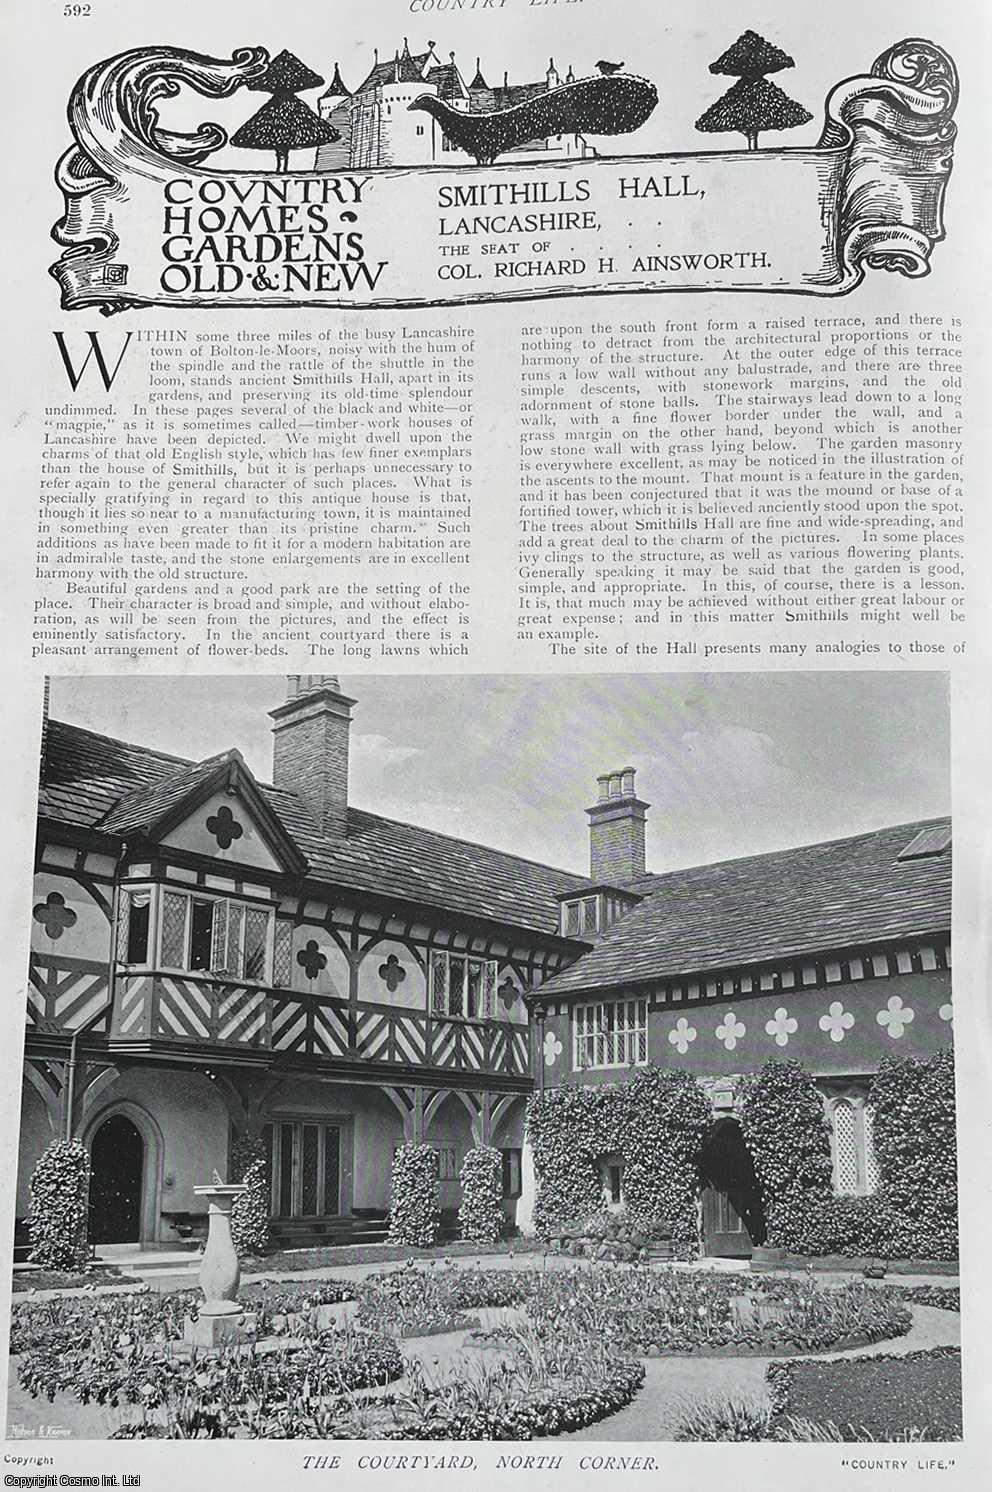 Country Life Magazine - Smithills Hall, Lancashire. The Seat of Colonel Richard H. Ainsworth. Several pictures and accompanying text, removed from an original issue of Country Life Magazine, 1902.